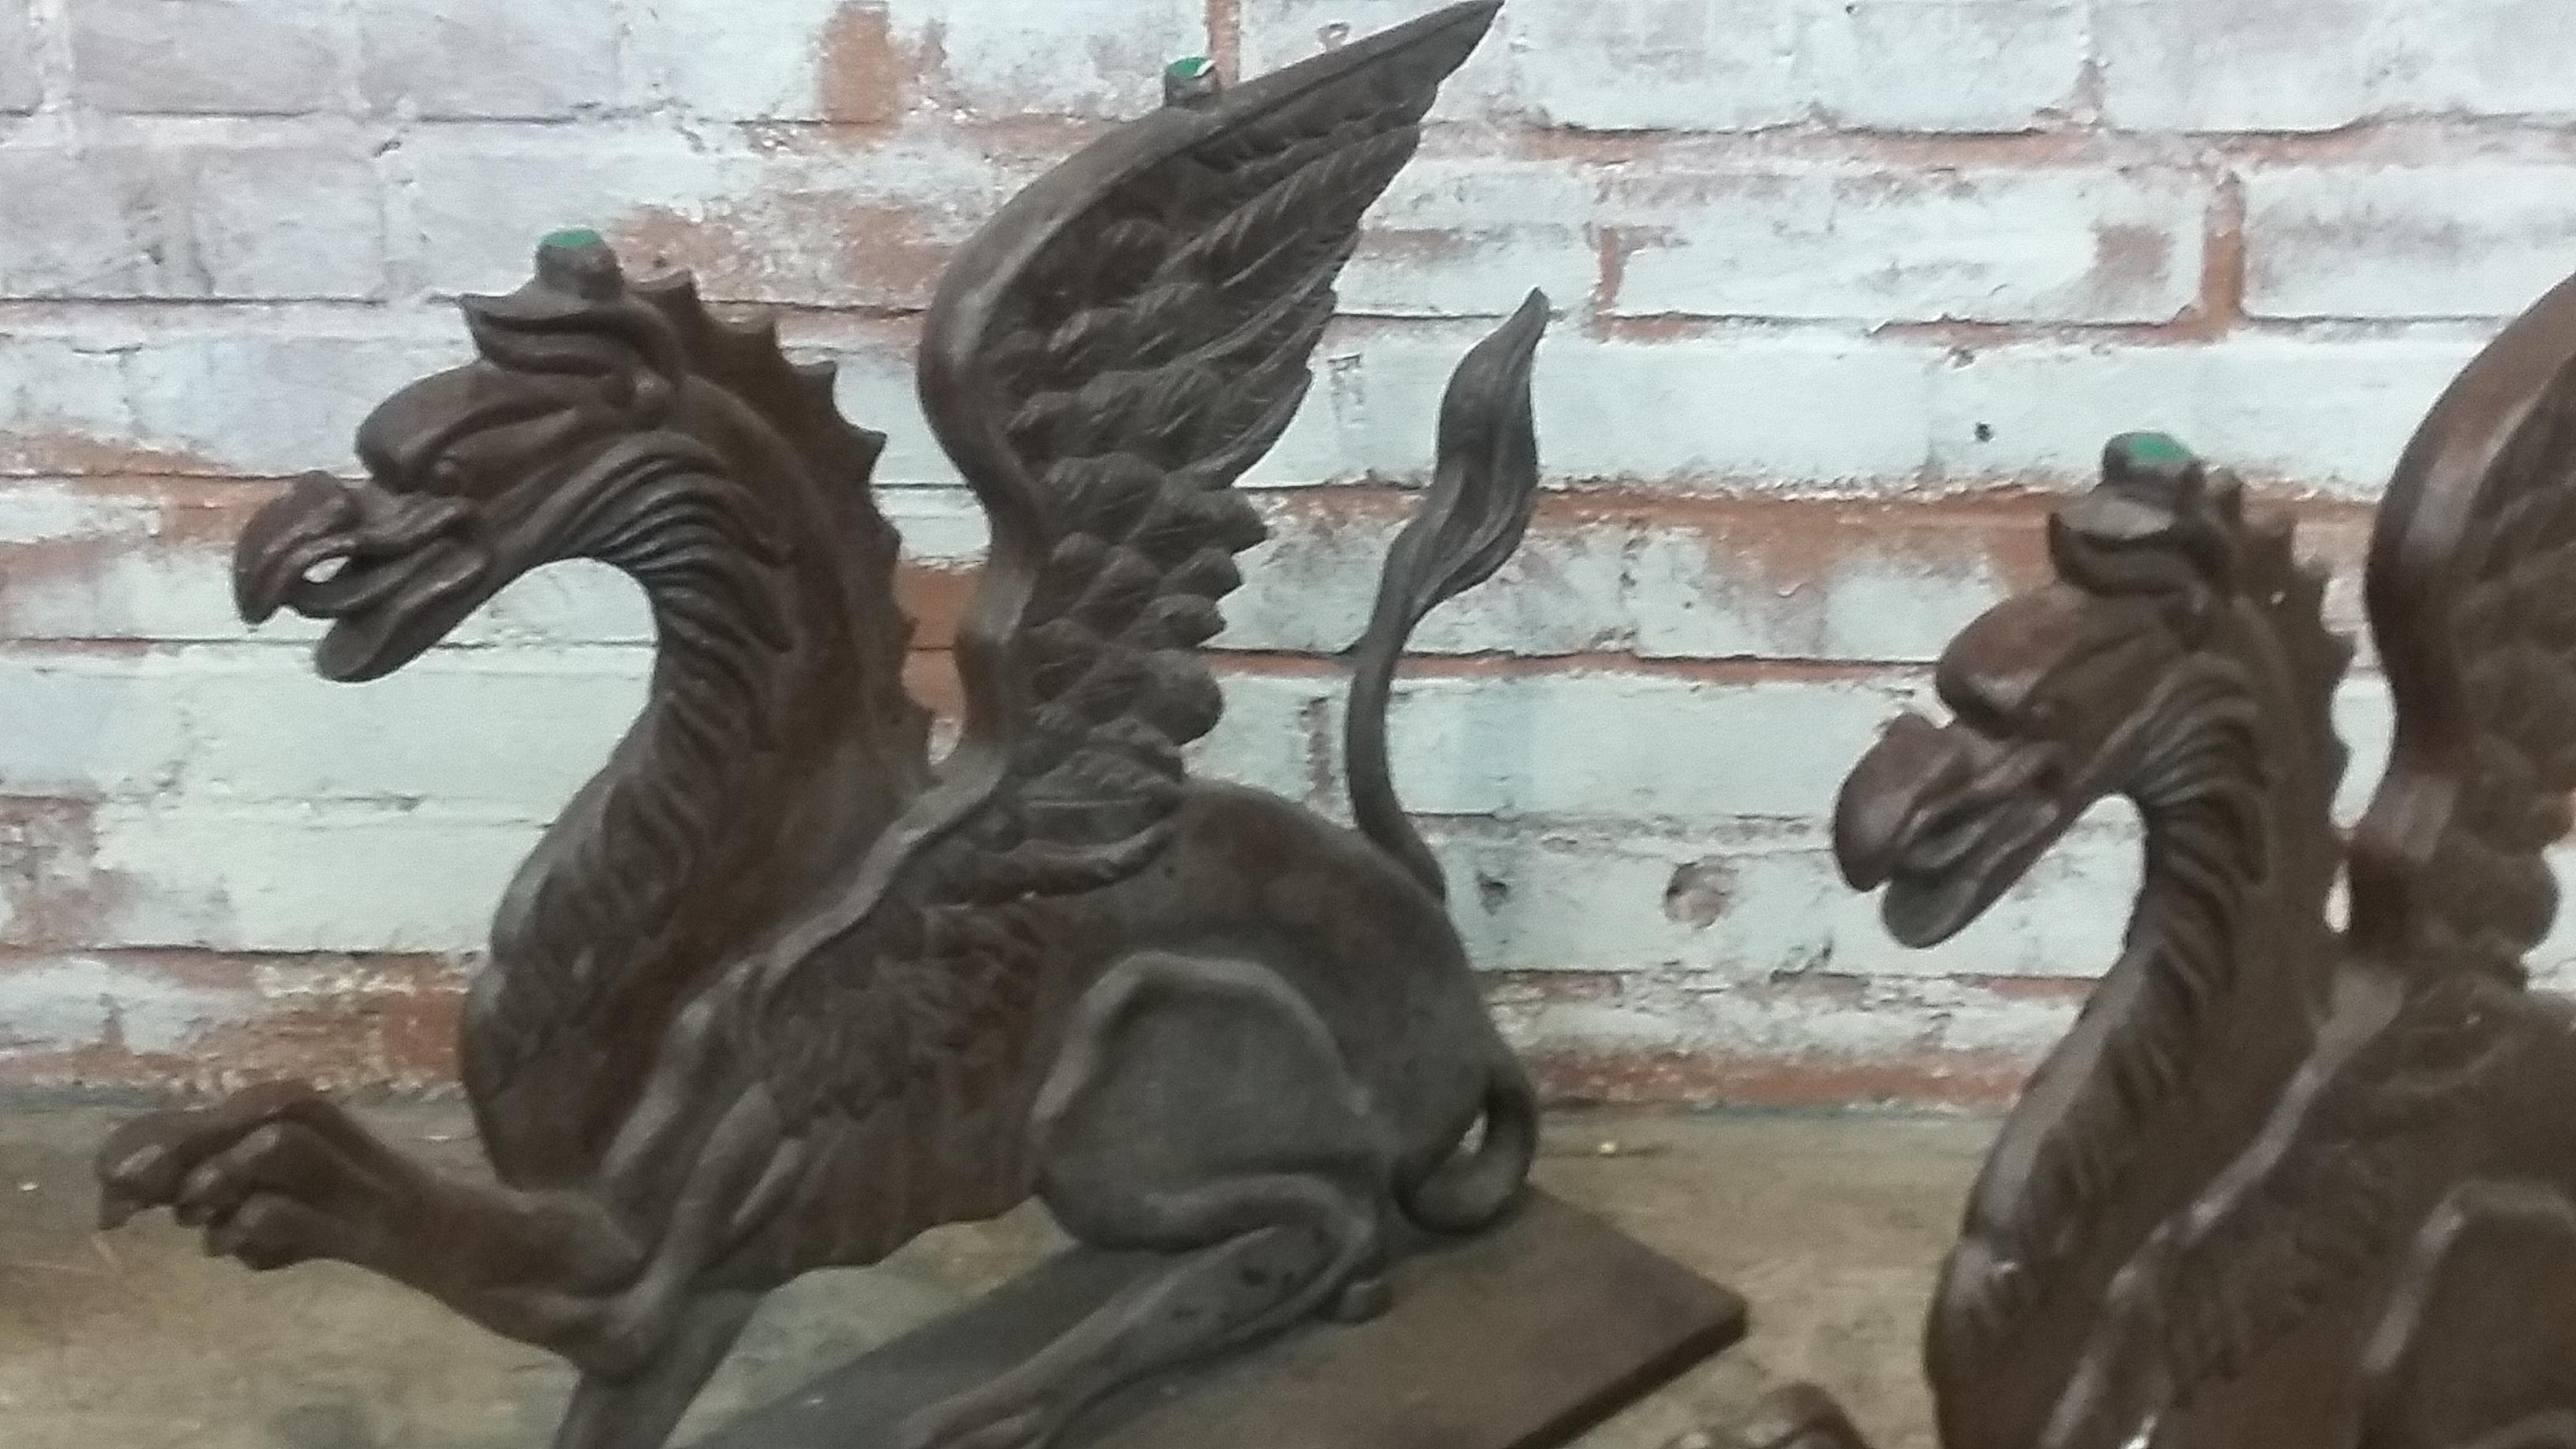 Unique set of Victorian 19th century cast iron griffin bases. Solid and heavy cast iron. Unsure of original purpose but ideal for cocktail table. Glass not included.